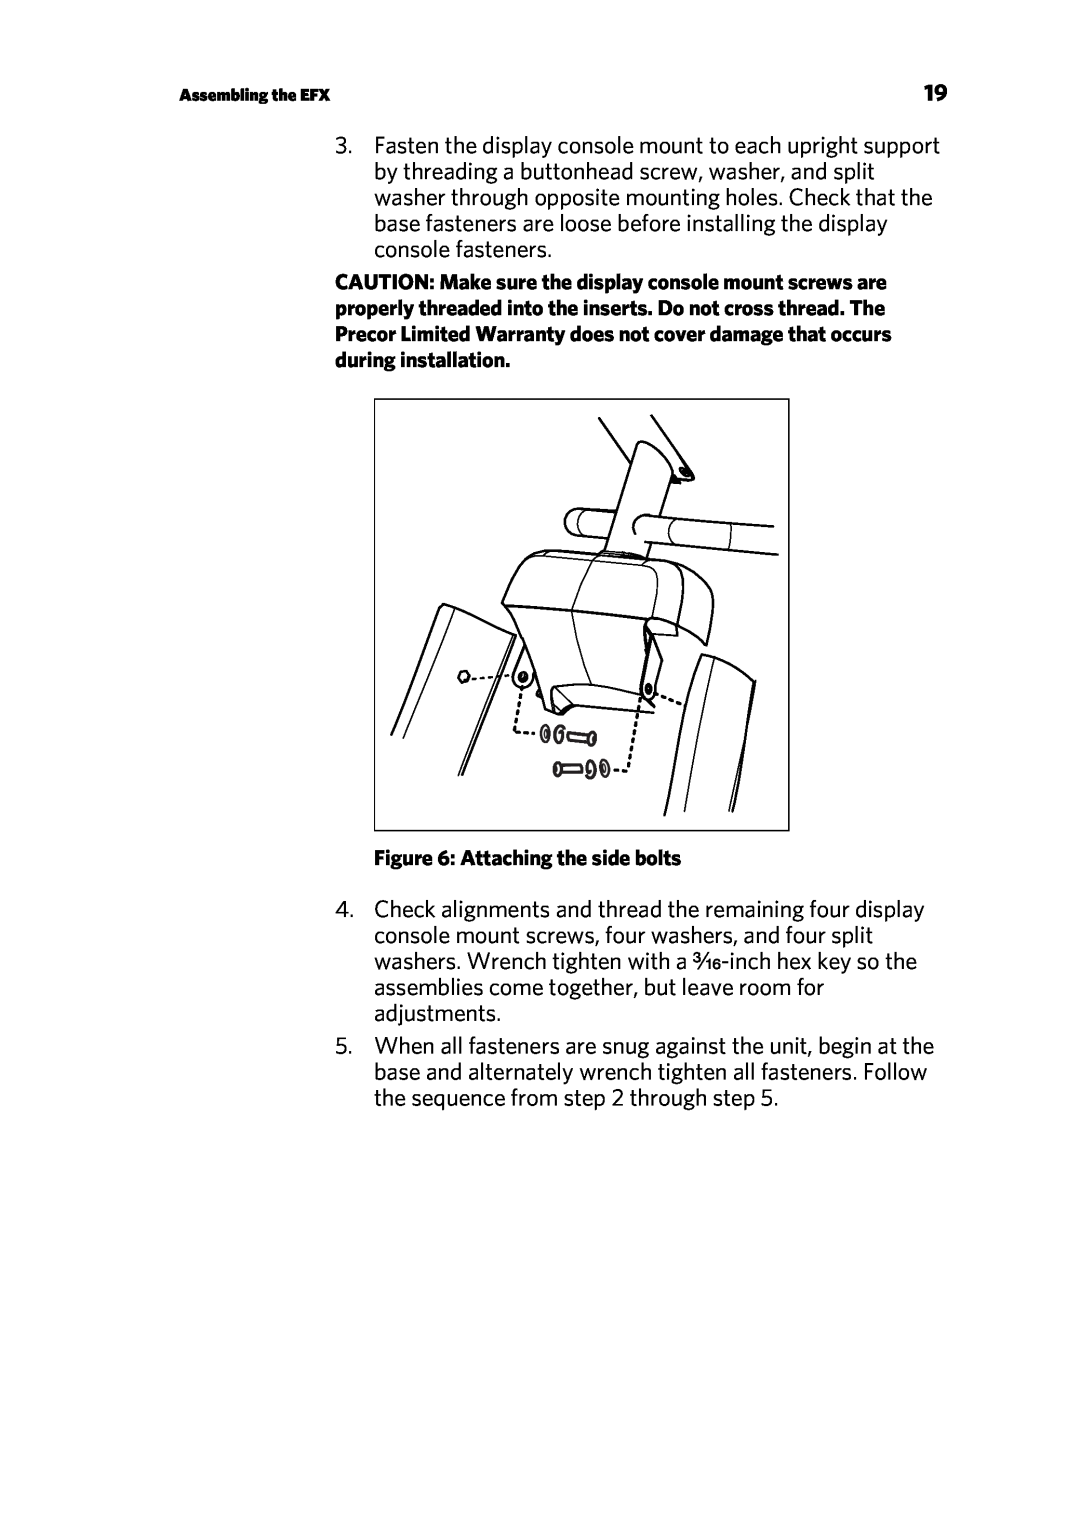 Precor 300753-201 manual Attaching the side bolts 